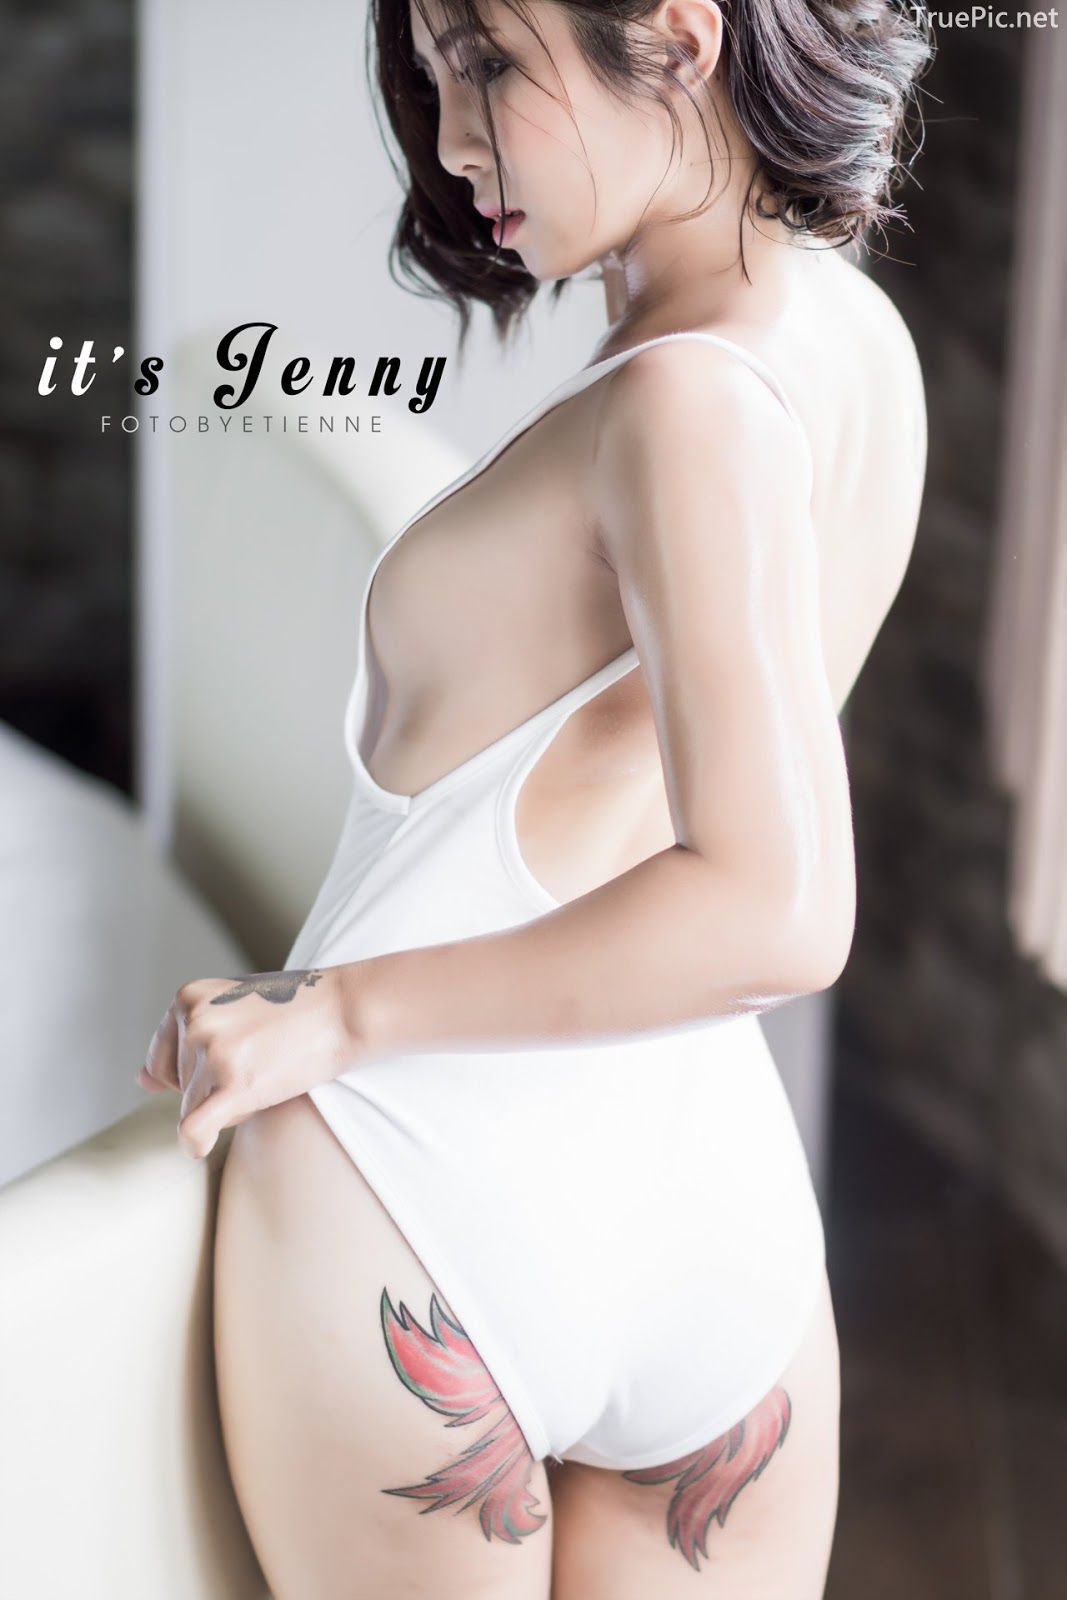 Super hot photos of Vietnamese beauties with lingerie and bikini – Photo by Le Blanc Studio – Part 7 - TruePic.net - Picture 68